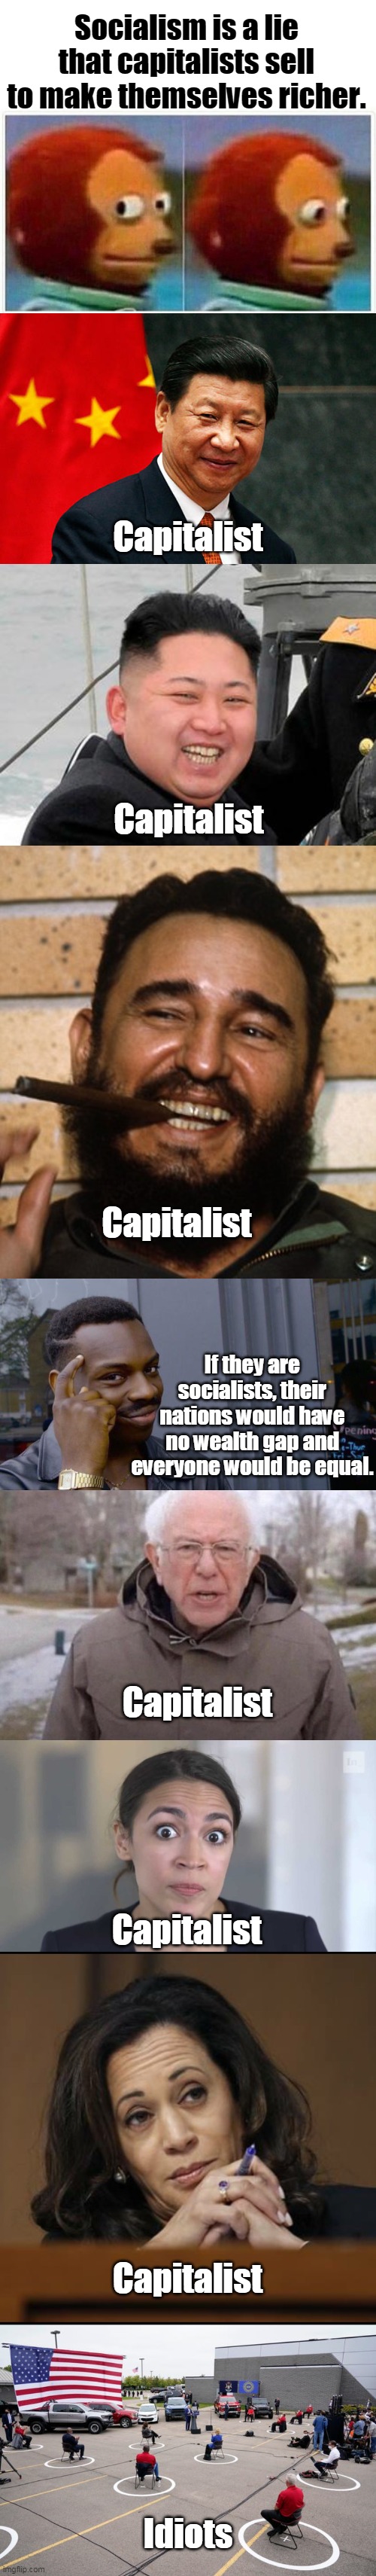 Obvious, really. | Socialism is a lie that capitalists sell to make themselves richer. Capitalist; Capitalist; Capitalist; If they are socialists, their nations would have no wealth gap and everyone would be equal. Capitalist; Capitalist; Capitalist; Idiots | image tagged in democrats,socialism,capitalism,china,north korea,biden | made w/ Imgflip meme maker